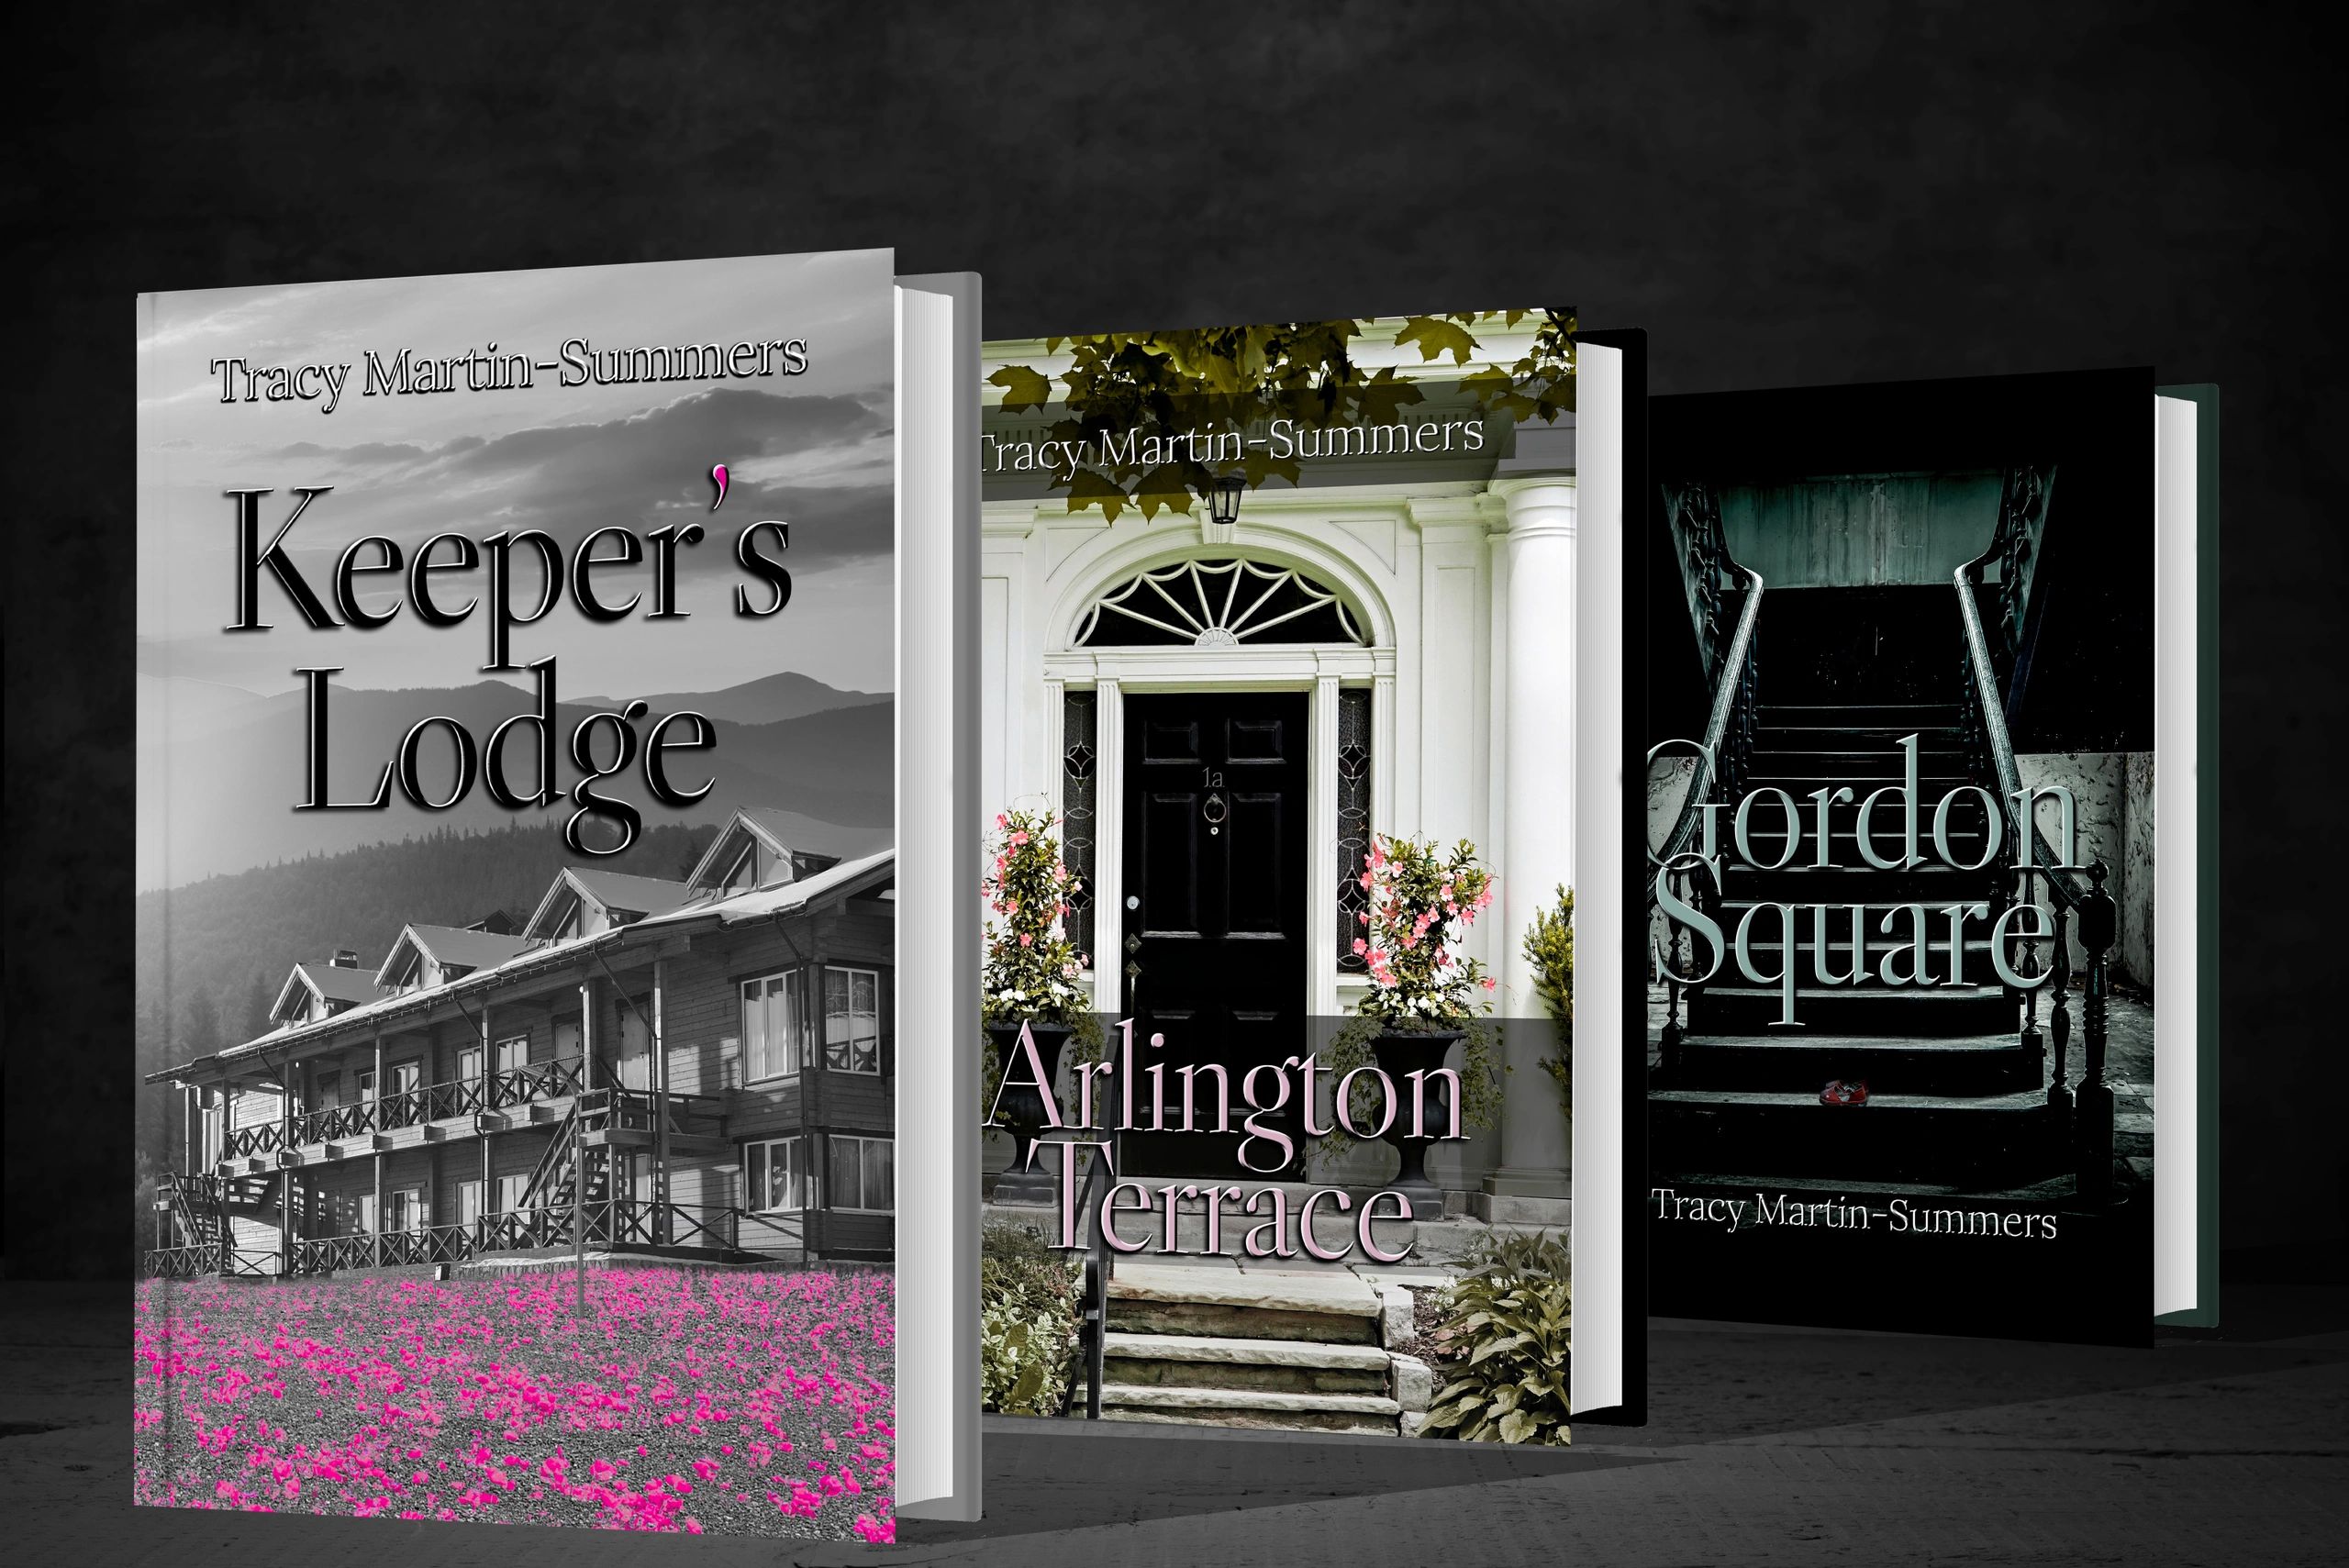 Gordon Square, Arlington Terrace, Keepers Lodge
Author Tracy Martin-Summers